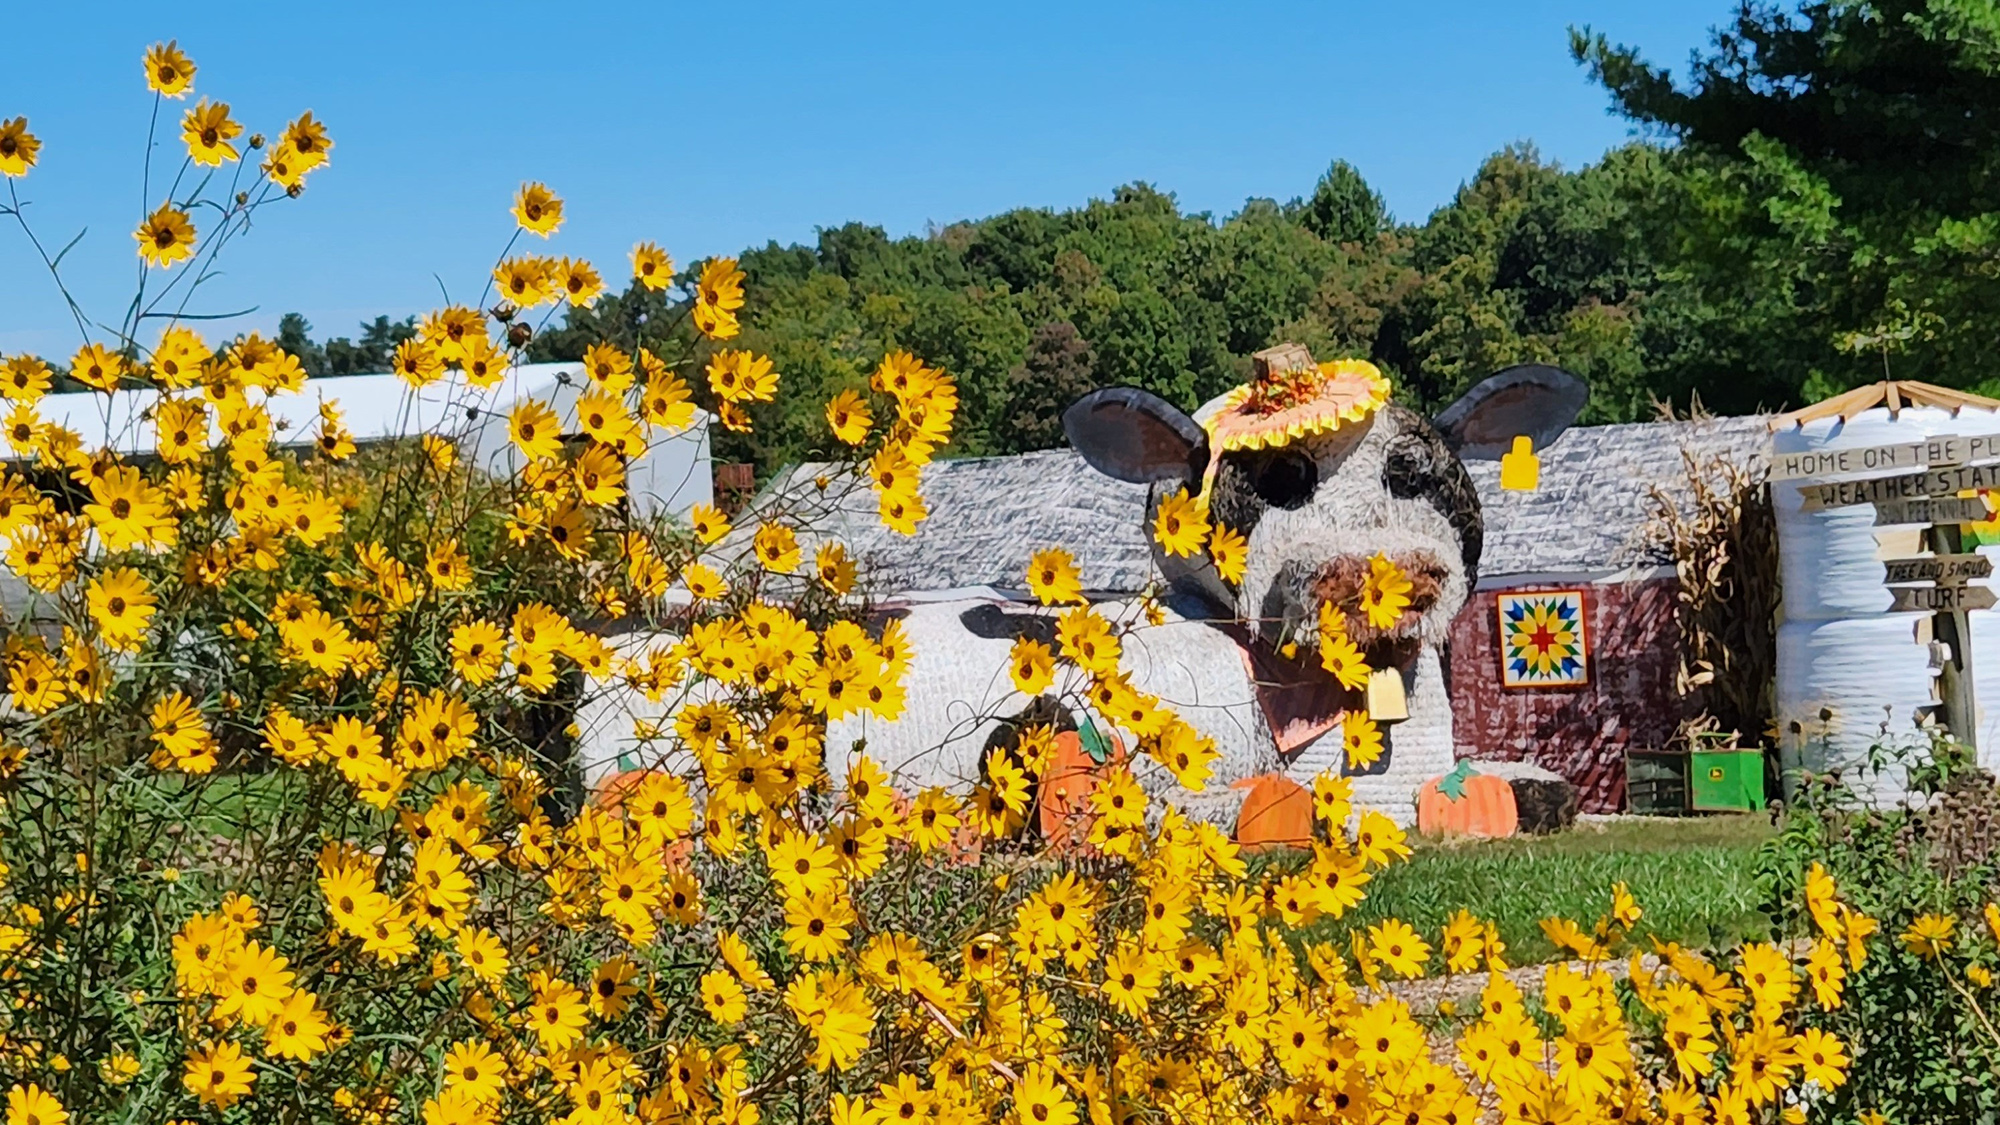 Sunflowers in front of cow constructed from hay bales